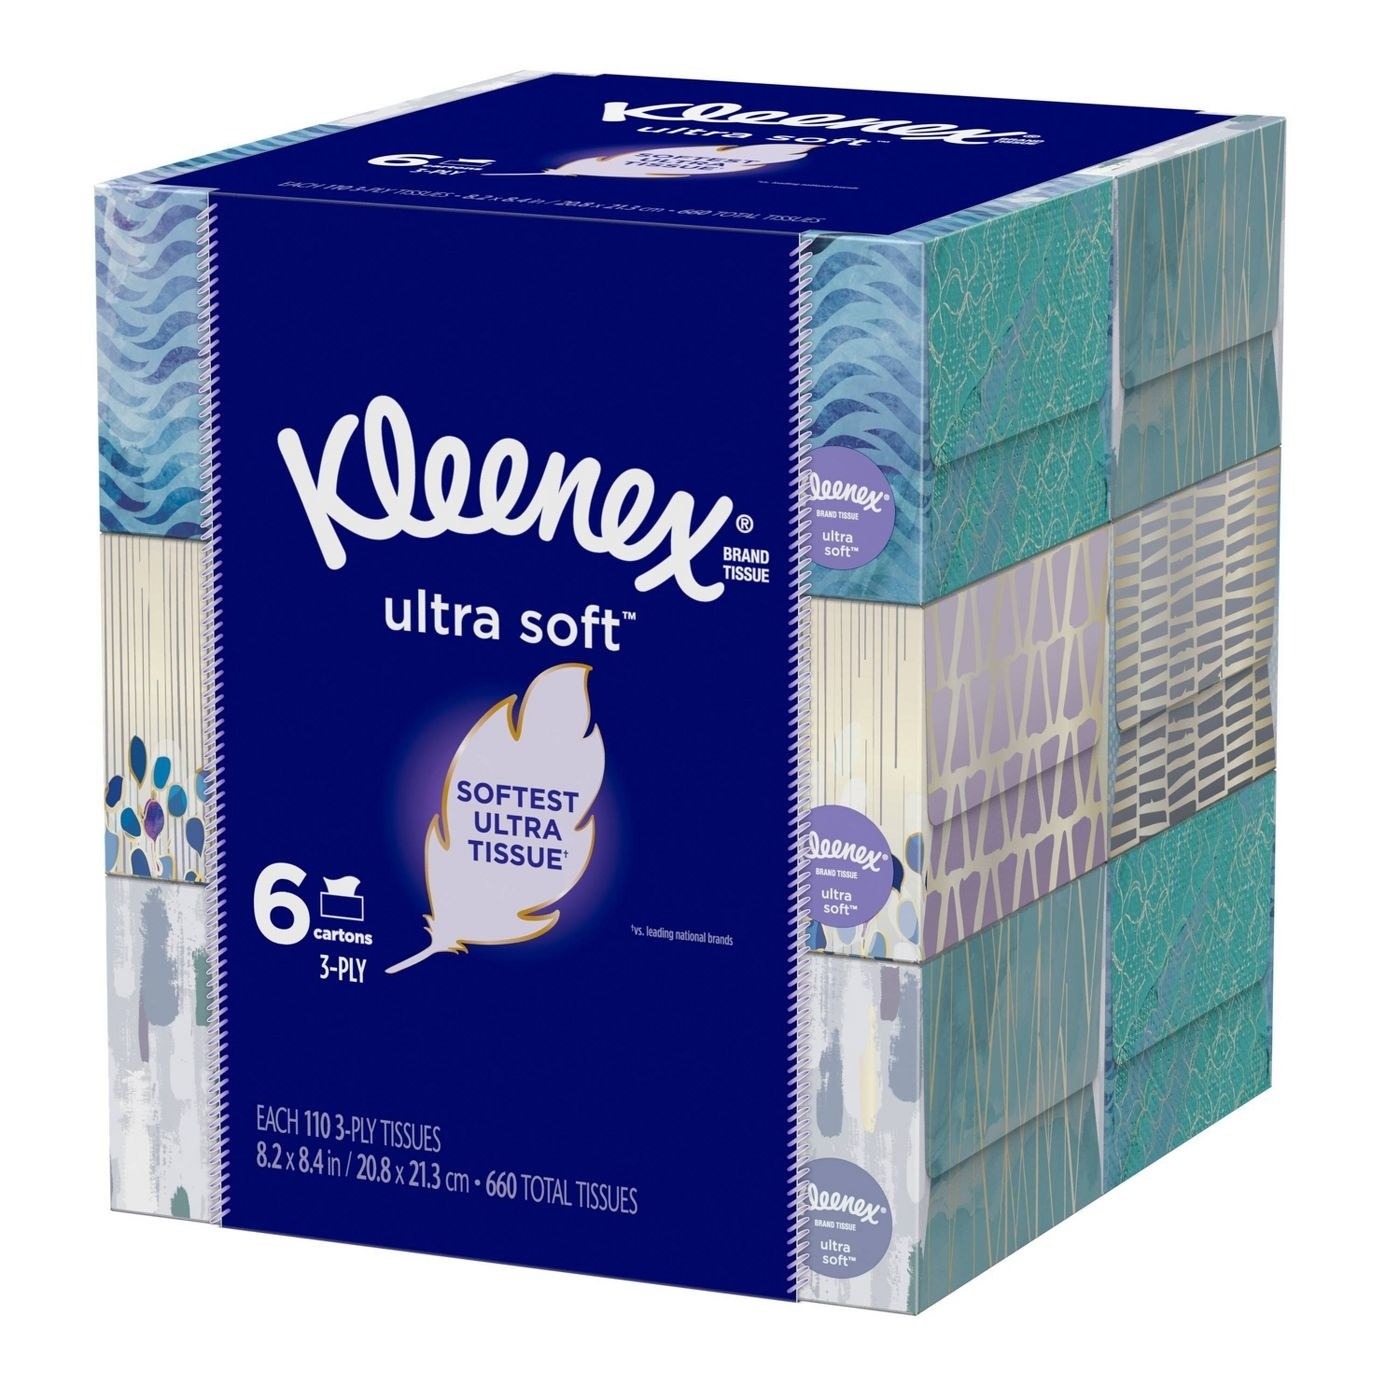 a 6-pack of kleenex ultra soft tissues